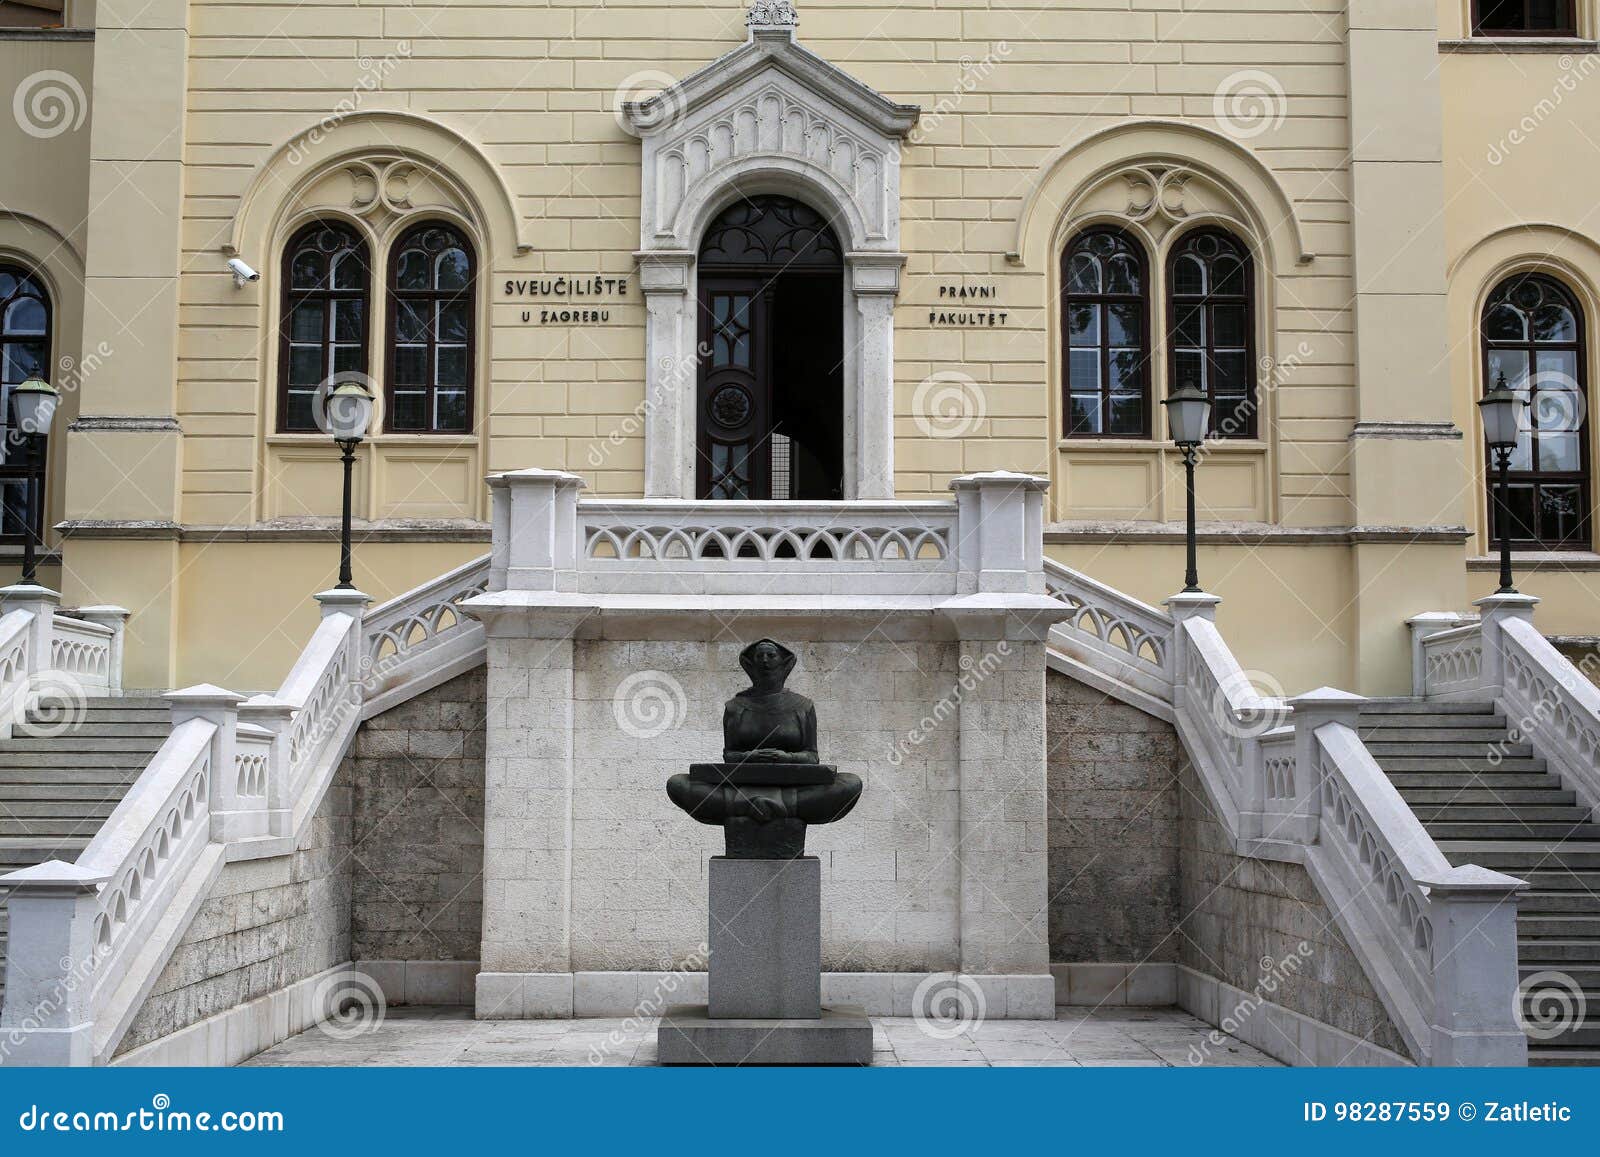 history of the croats, sculpture by ivan mestrovic, located in front zagreb university building